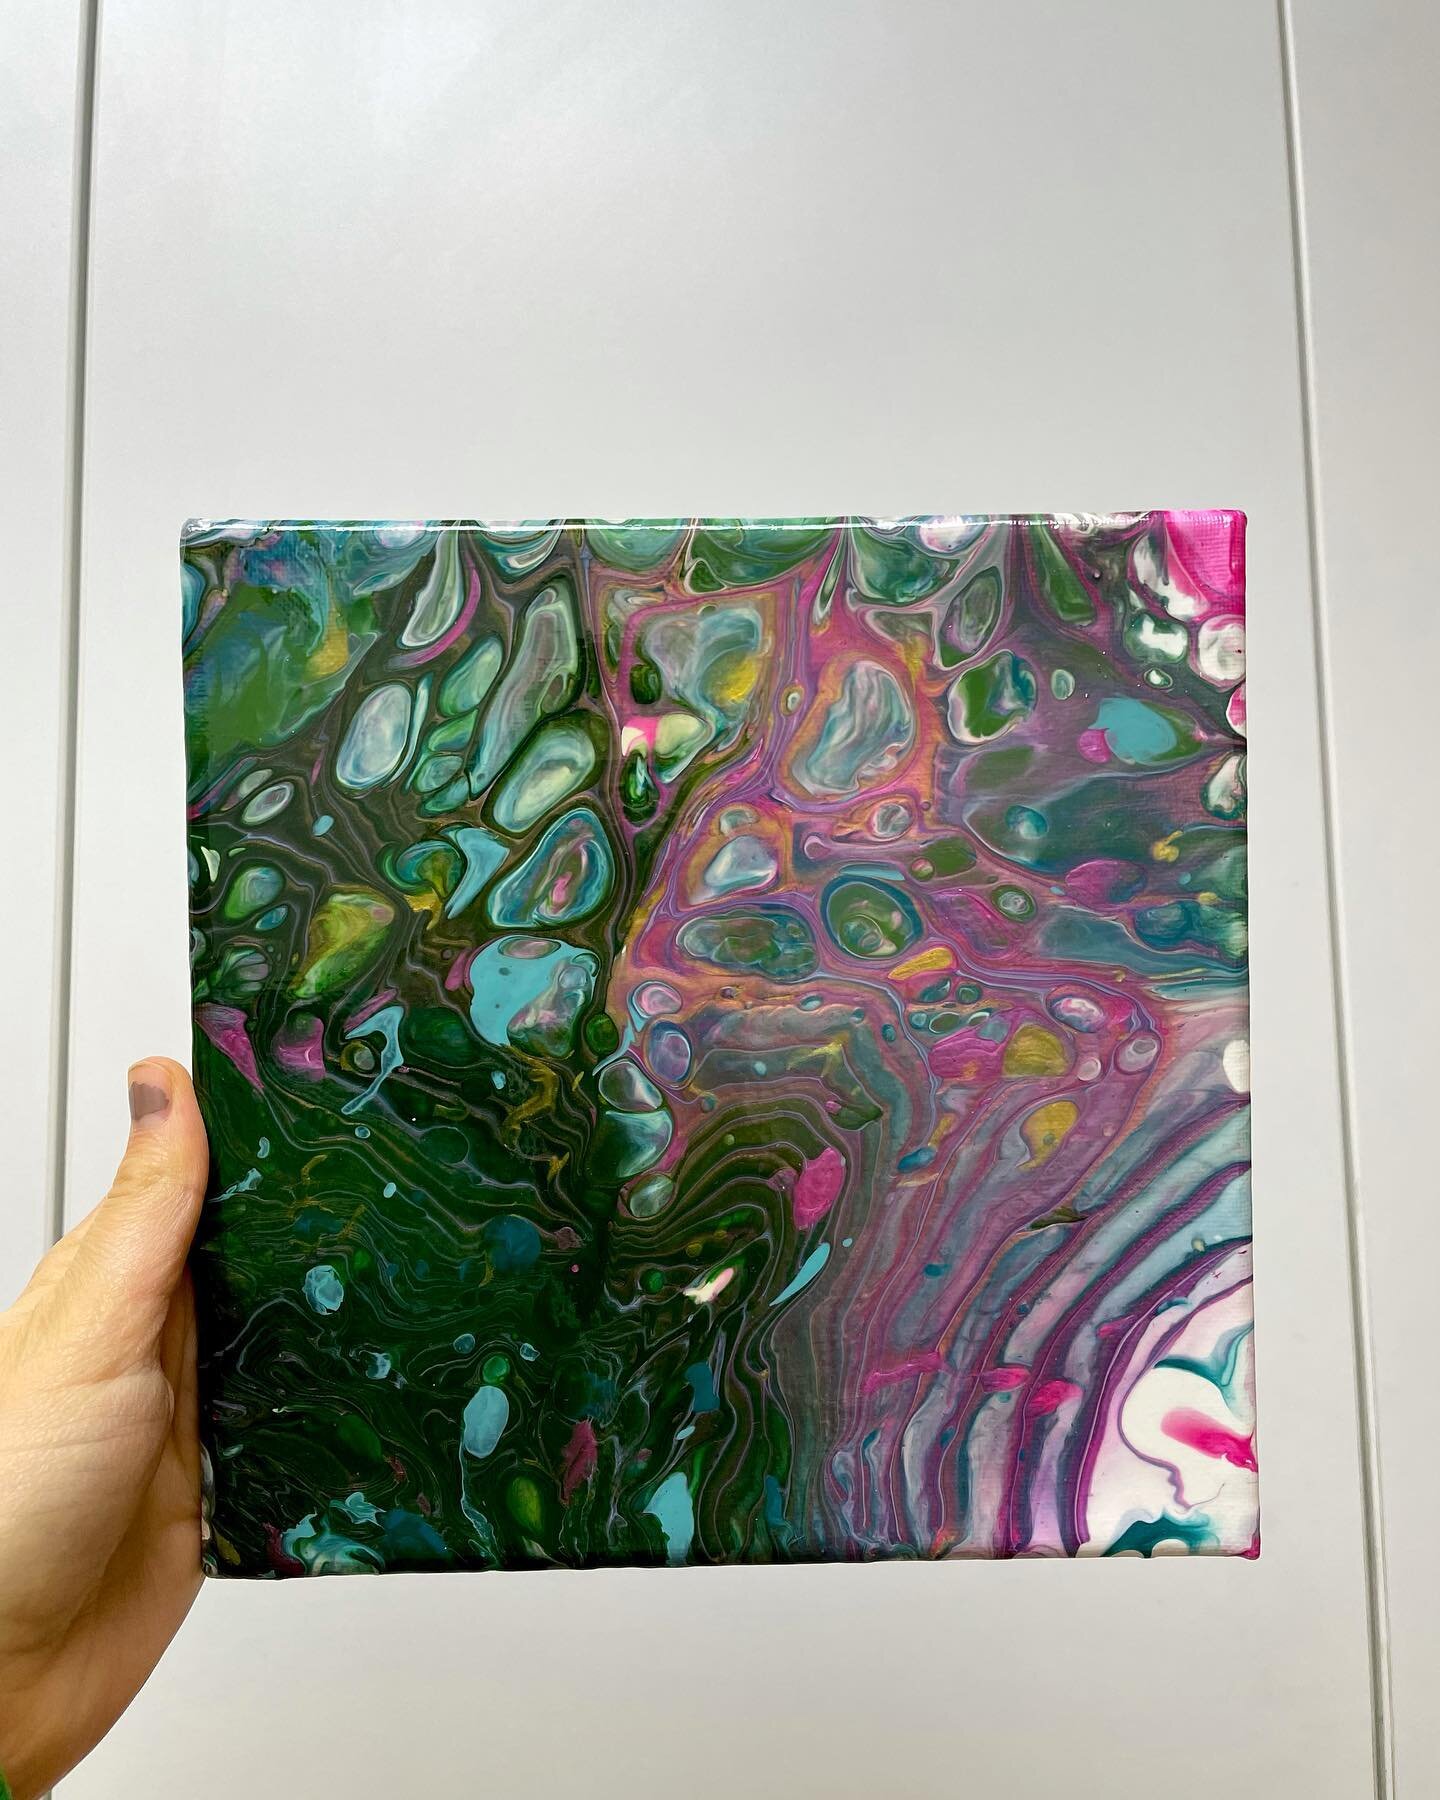 Butterfly Dreams Acrylic Pour Painting 🦋💚💖
.
8x8
$38 + shipping 
.
Currently only on insta - DM to claim :) Inquire about NYC + Astoria pick up / drop off. 
.
This bb was born out of a tree ring pour. She is varnished which protects it from the su